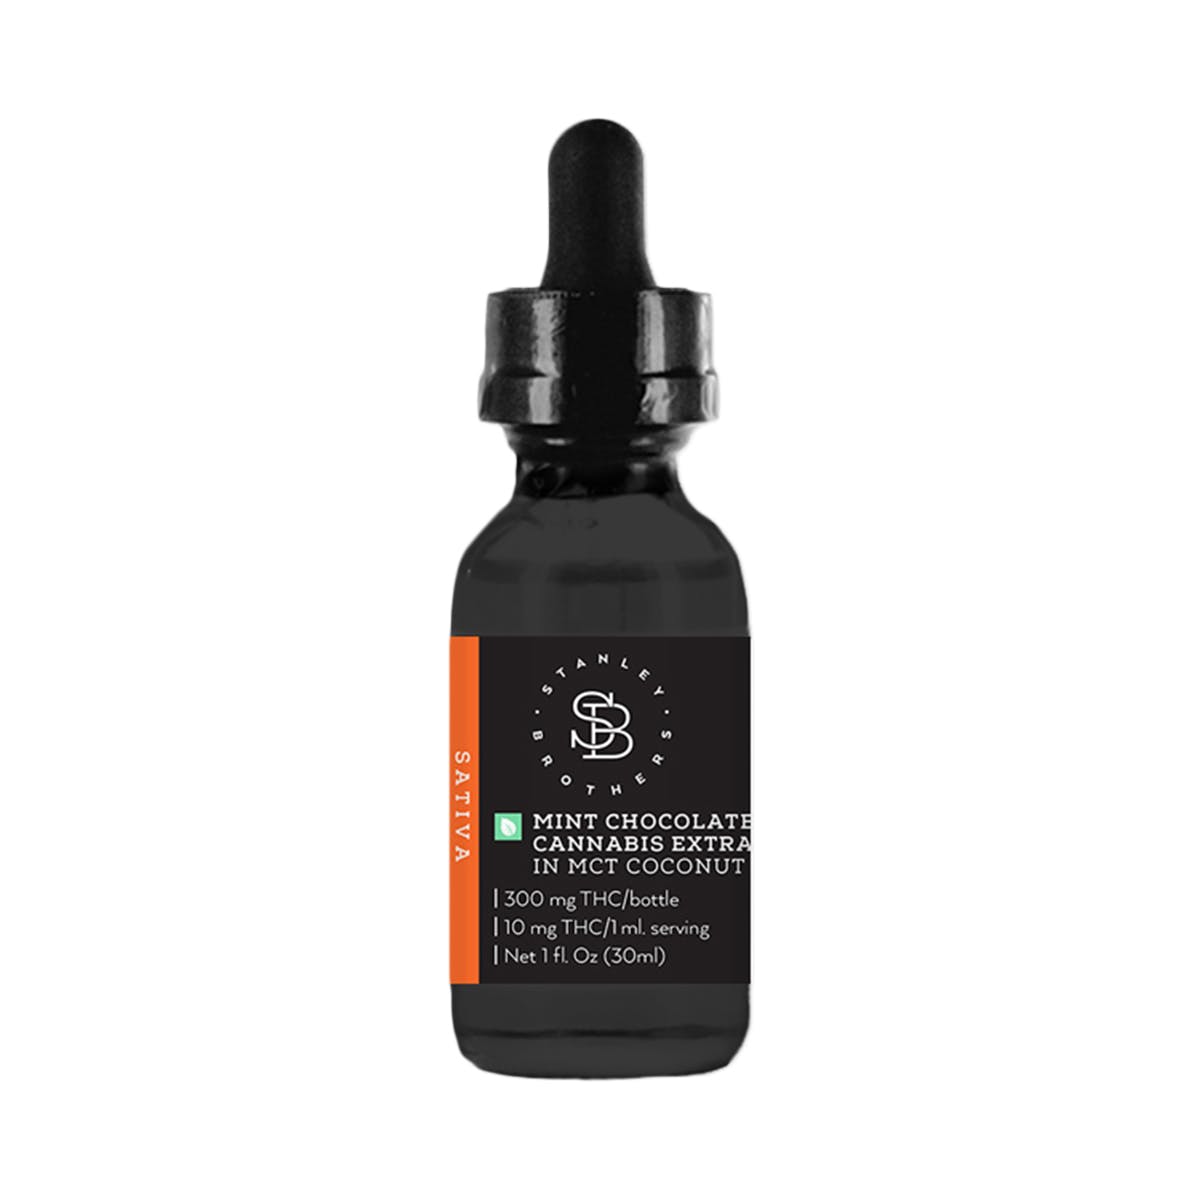 marijuana-dispensaries-livwell-fort-collins-med-in-fort-collins-sb-tincture-mint-chocolate-sativa-300mg-thc-med